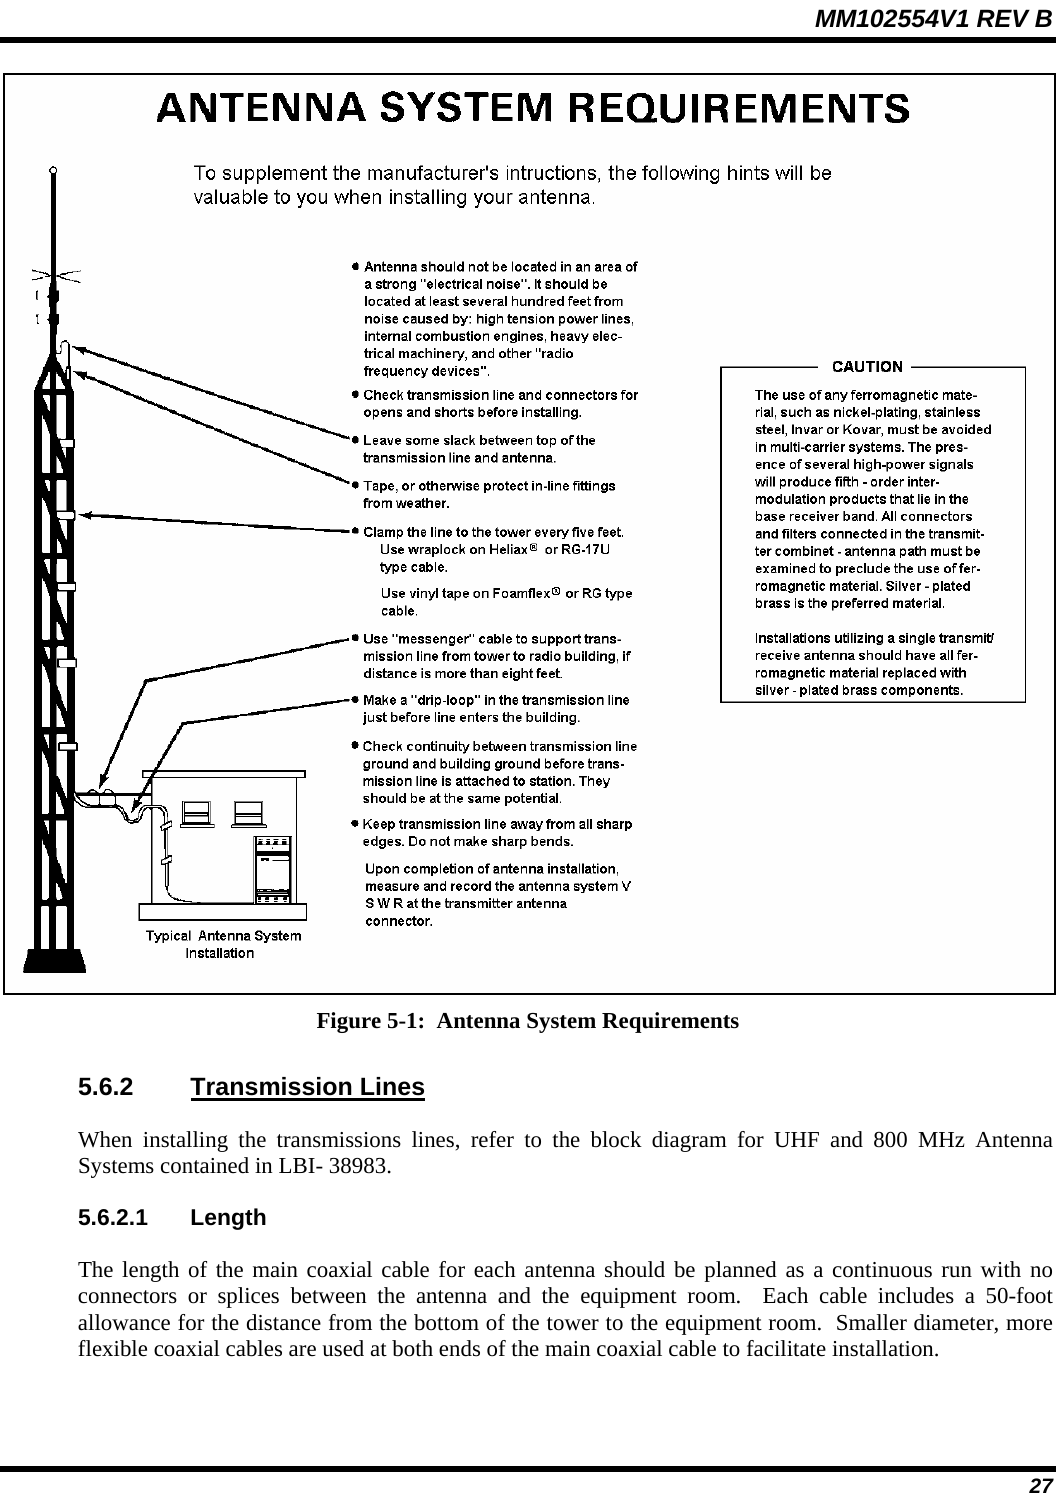 MM102554V1 REV B  27  Figure 5-1:  Antenna System Requirements 5.6.2 Transmission Lines When installing the transmissions lines, refer to the block diagram for UHF and 800 MHz Antenna Systems contained in LBI- 38983. 5.6.2.1 Length The length of the main coaxial cable for each antenna should be planned as a continuous run with no connectors or splices between the antenna and the equipment room.  Each cable includes a 50-foot allowance for the distance from the bottom of the tower to the equipment room.  Smaller diameter, more flexible coaxial cables are used at both ends of the main coaxial cable to facilitate installation. 